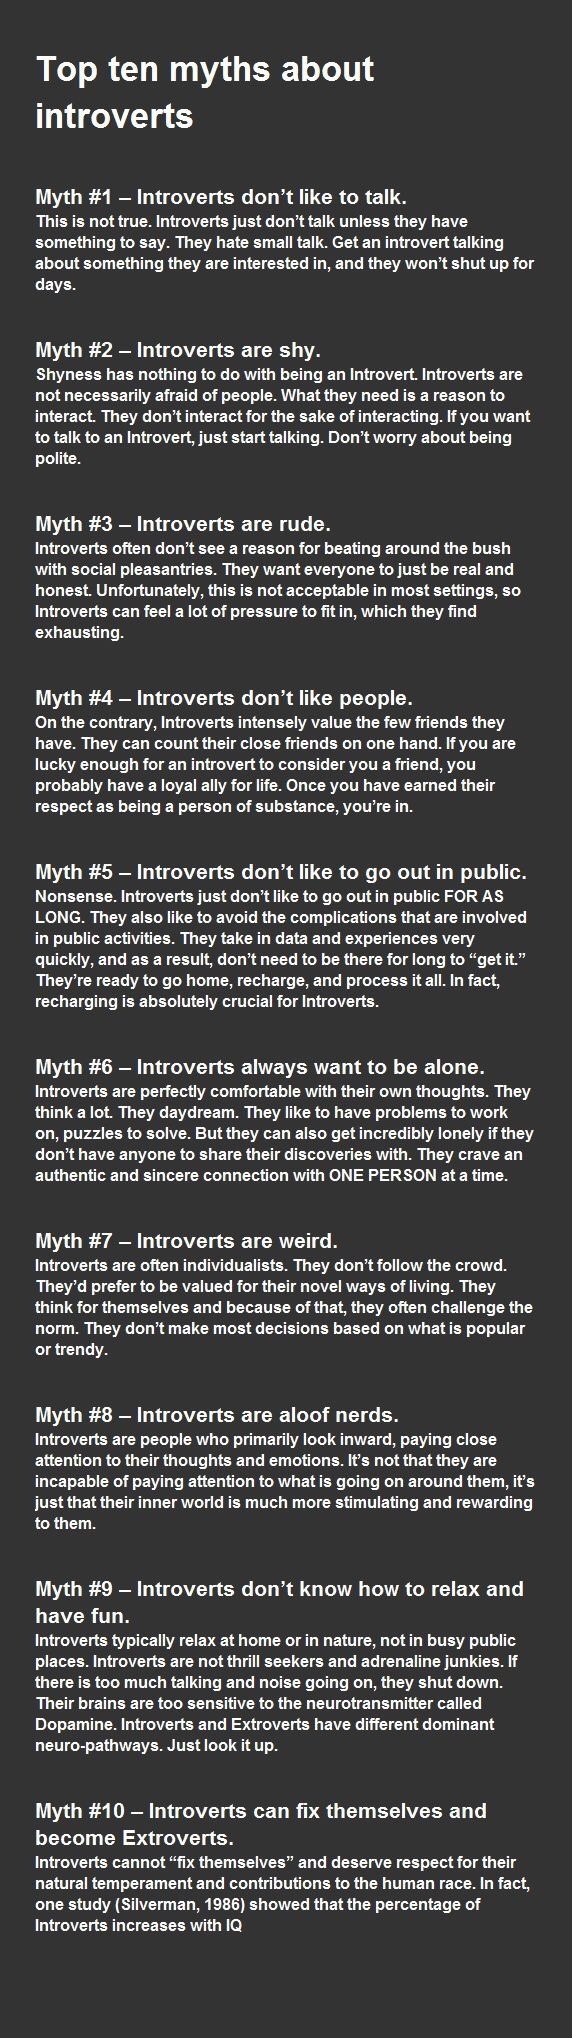 Myths about introverts